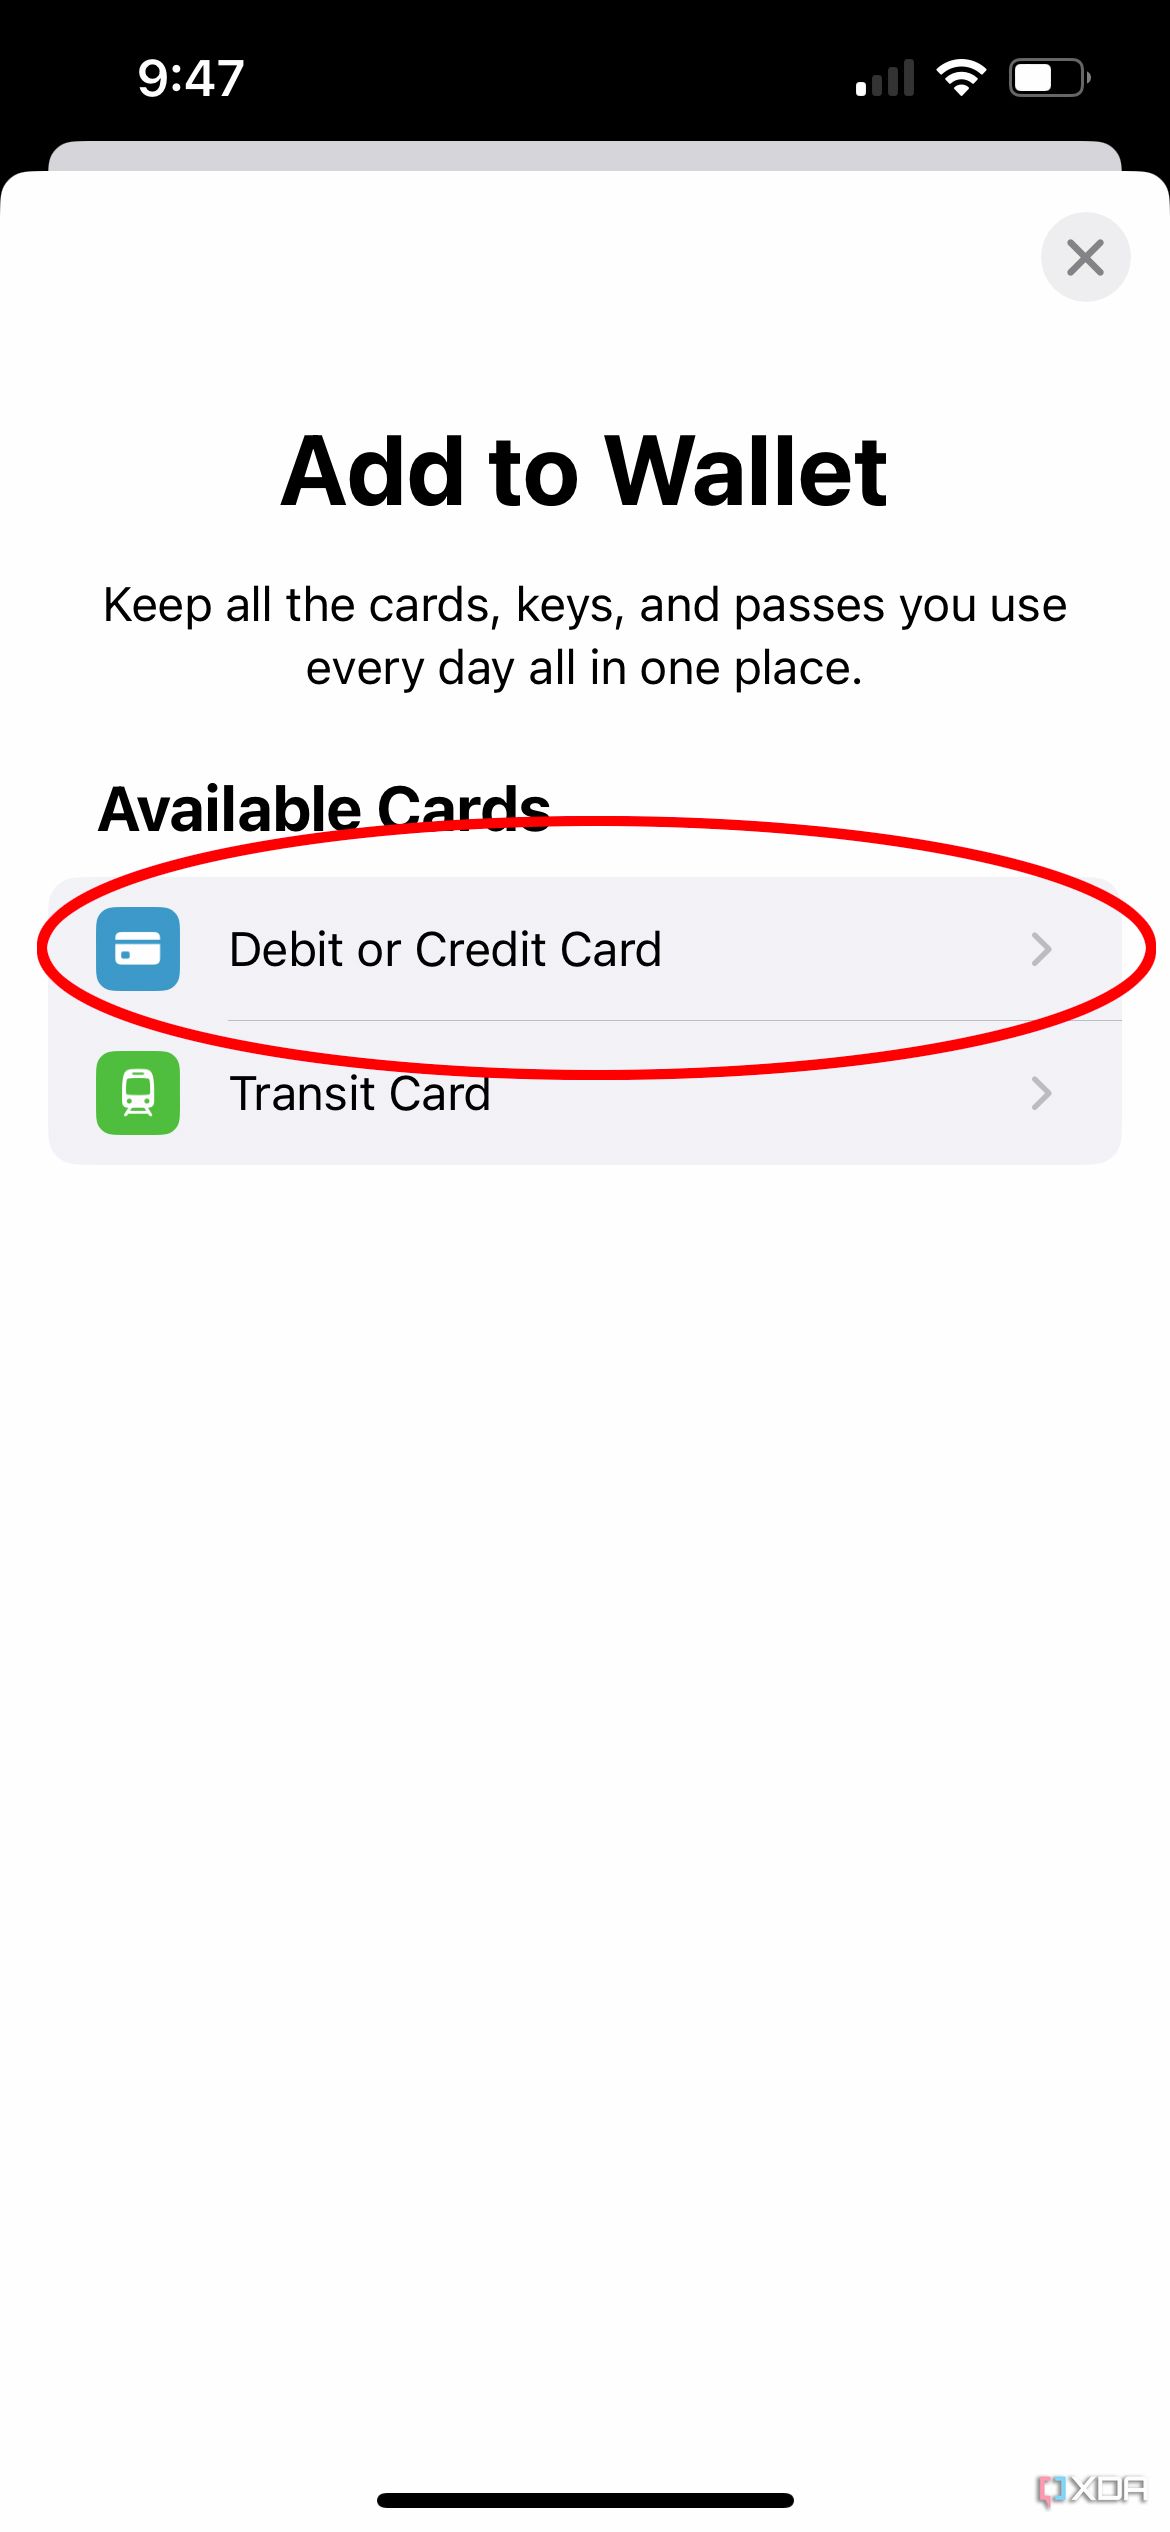 The Add to Wallet screen in the Apple Wallet app on iPhone.